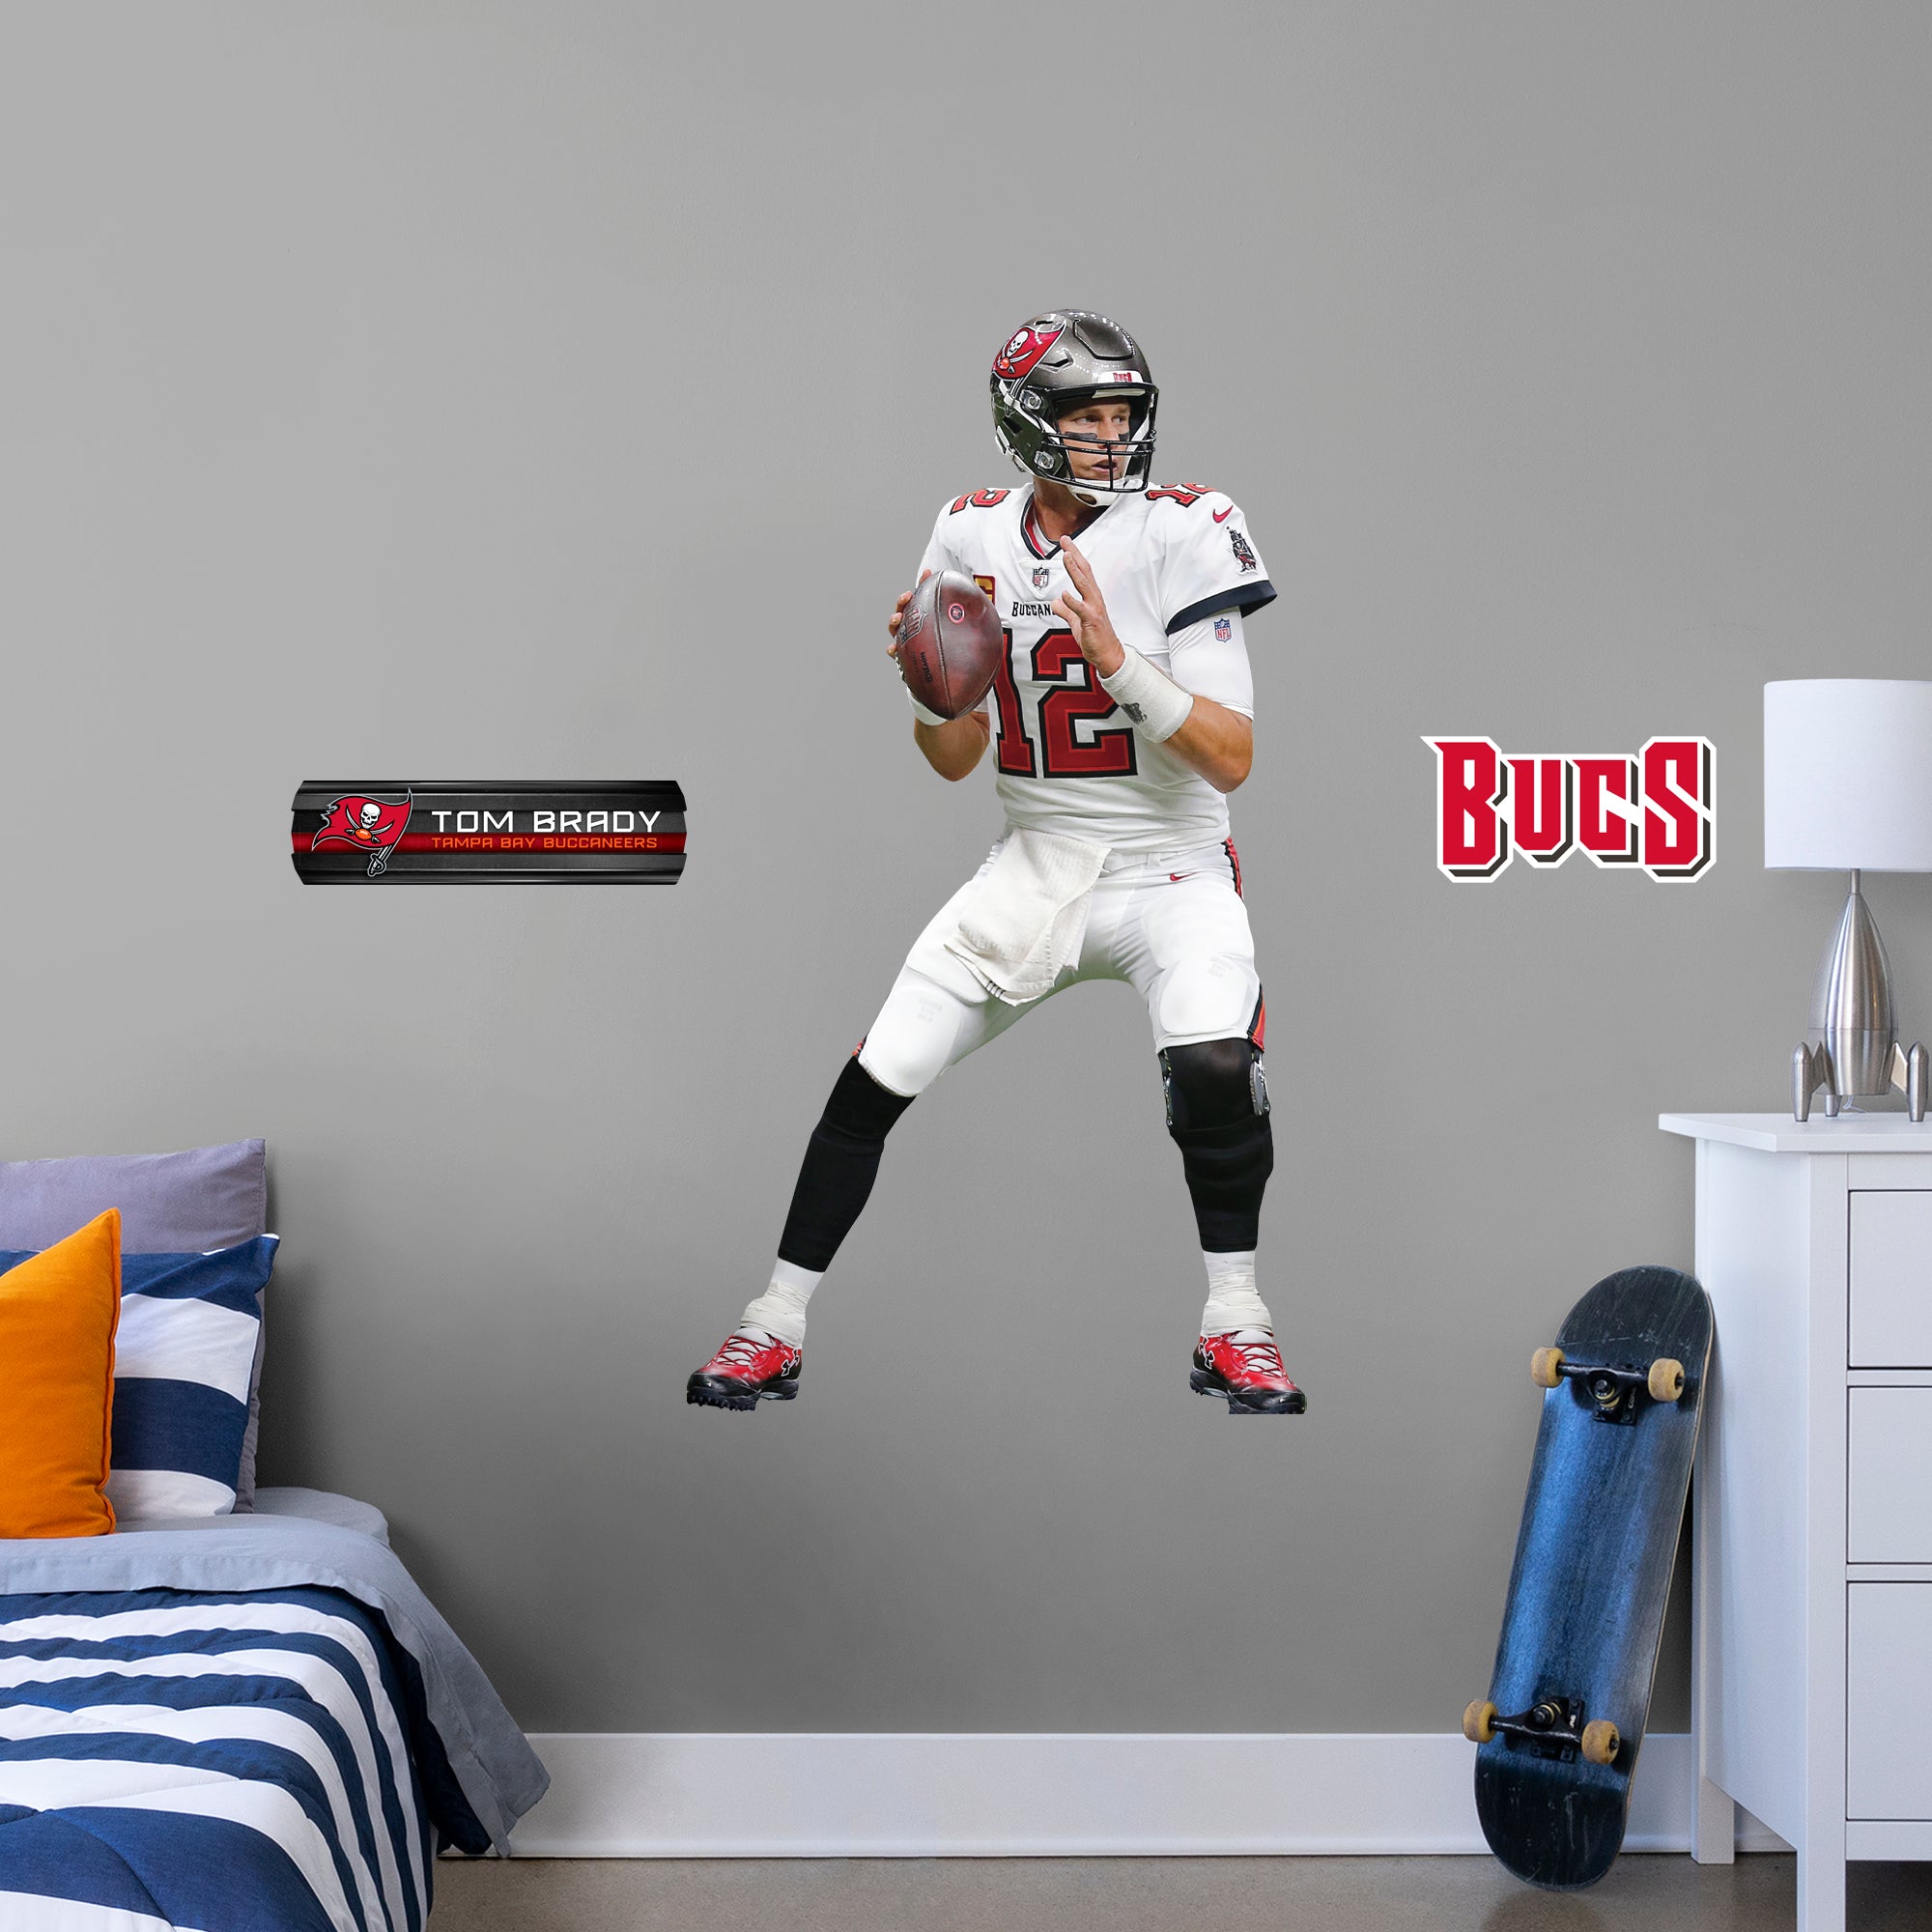 Tom Brady: Officially Licensed NFL Removable Wall Decal Giant Athlete + 2 Decals (31"W x 51"H) by Fathead | Vinyl